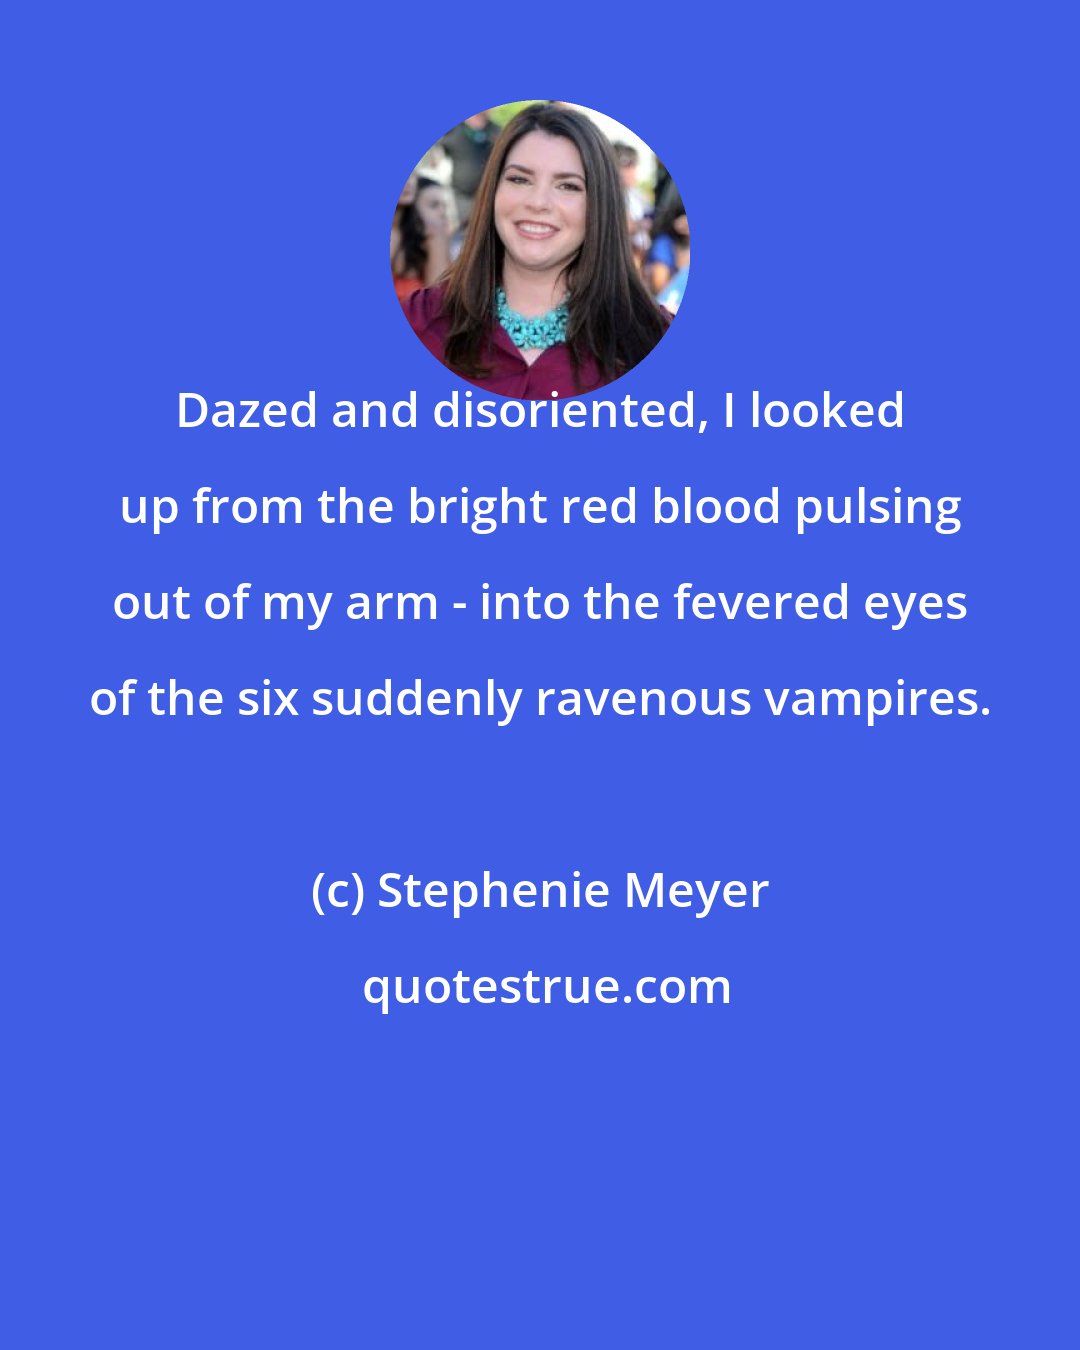 Stephenie Meyer: Dazed and disoriented, I looked up from the bright red blood pulsing out of my arm - into the fevered eyes of the six suddenly ravenous vampires.